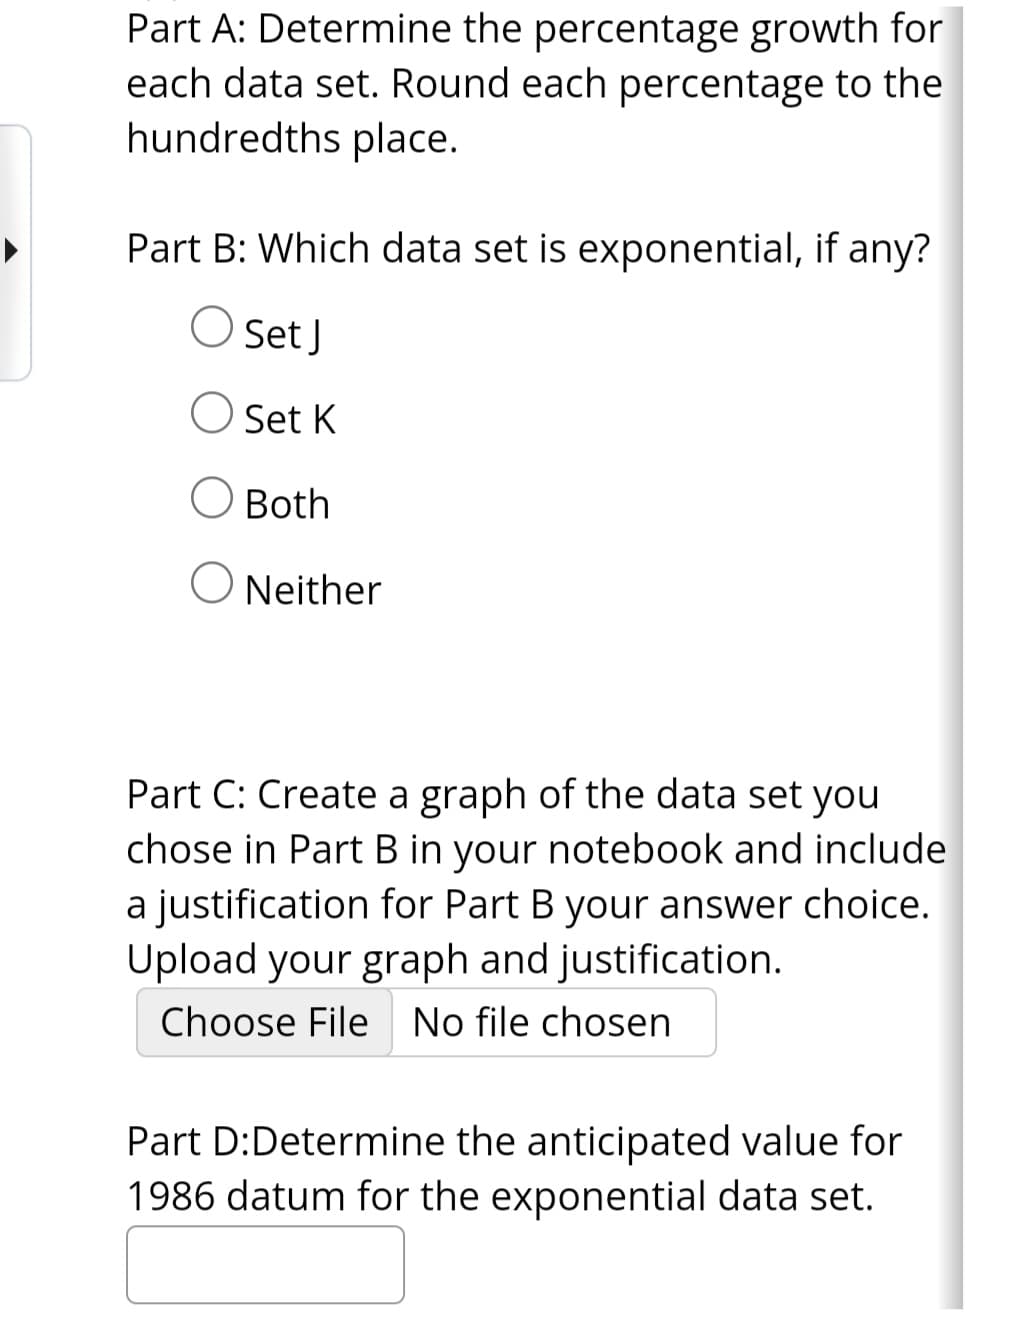 Part A: Determine the percentage growth for
each data set. Round each percentage to the
hundredths place.
Part B: Which data set is exponential, if any?
Set J
O Set K
O Both
O Neither
Part C: Create a graph of the data set you
chose in Part B in your notebook and include
a justification for Part B your answer choice.
Upload your graph and justification.
Choose File No file chosen
Part D:Determine the anticipated value for
1986 datum for the exponential data set.